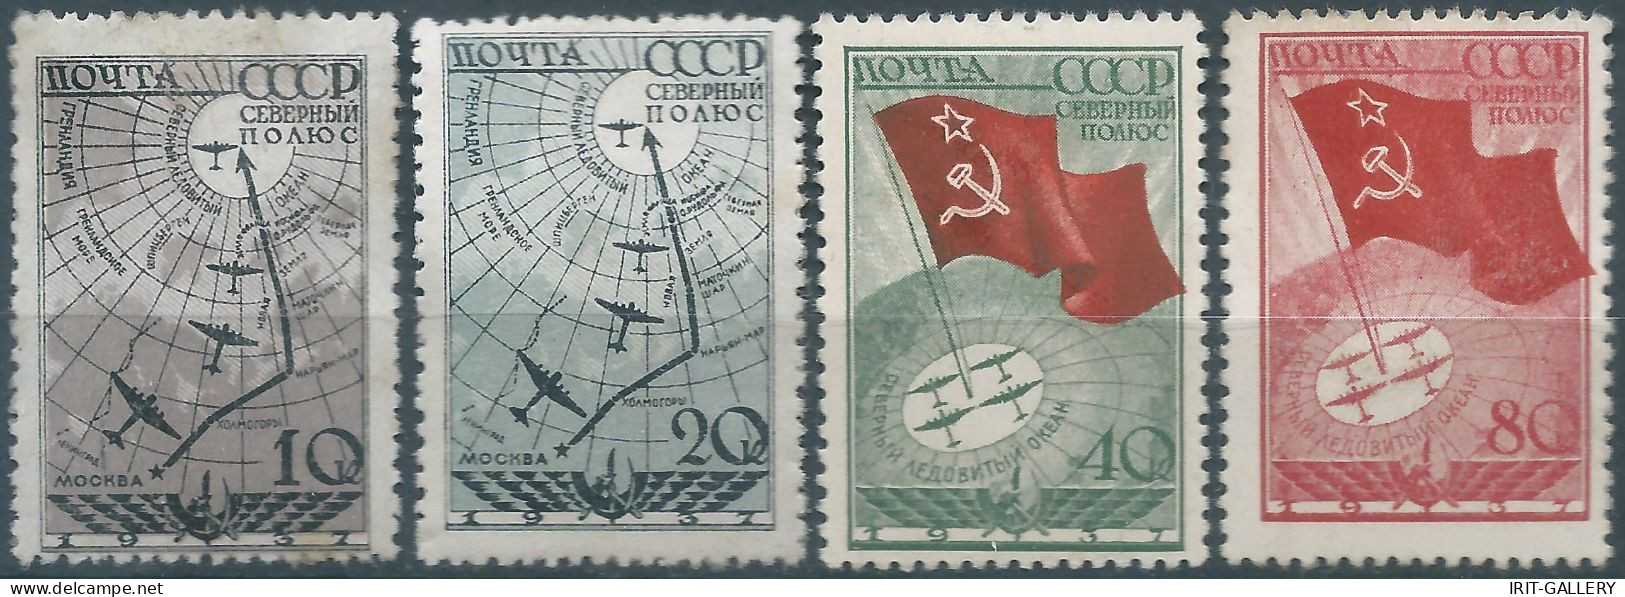 Russia-Union Of Soviet-CCCP,1938 North Pole Flight Expedition,Mint ,Value:€19,50 - Neufs